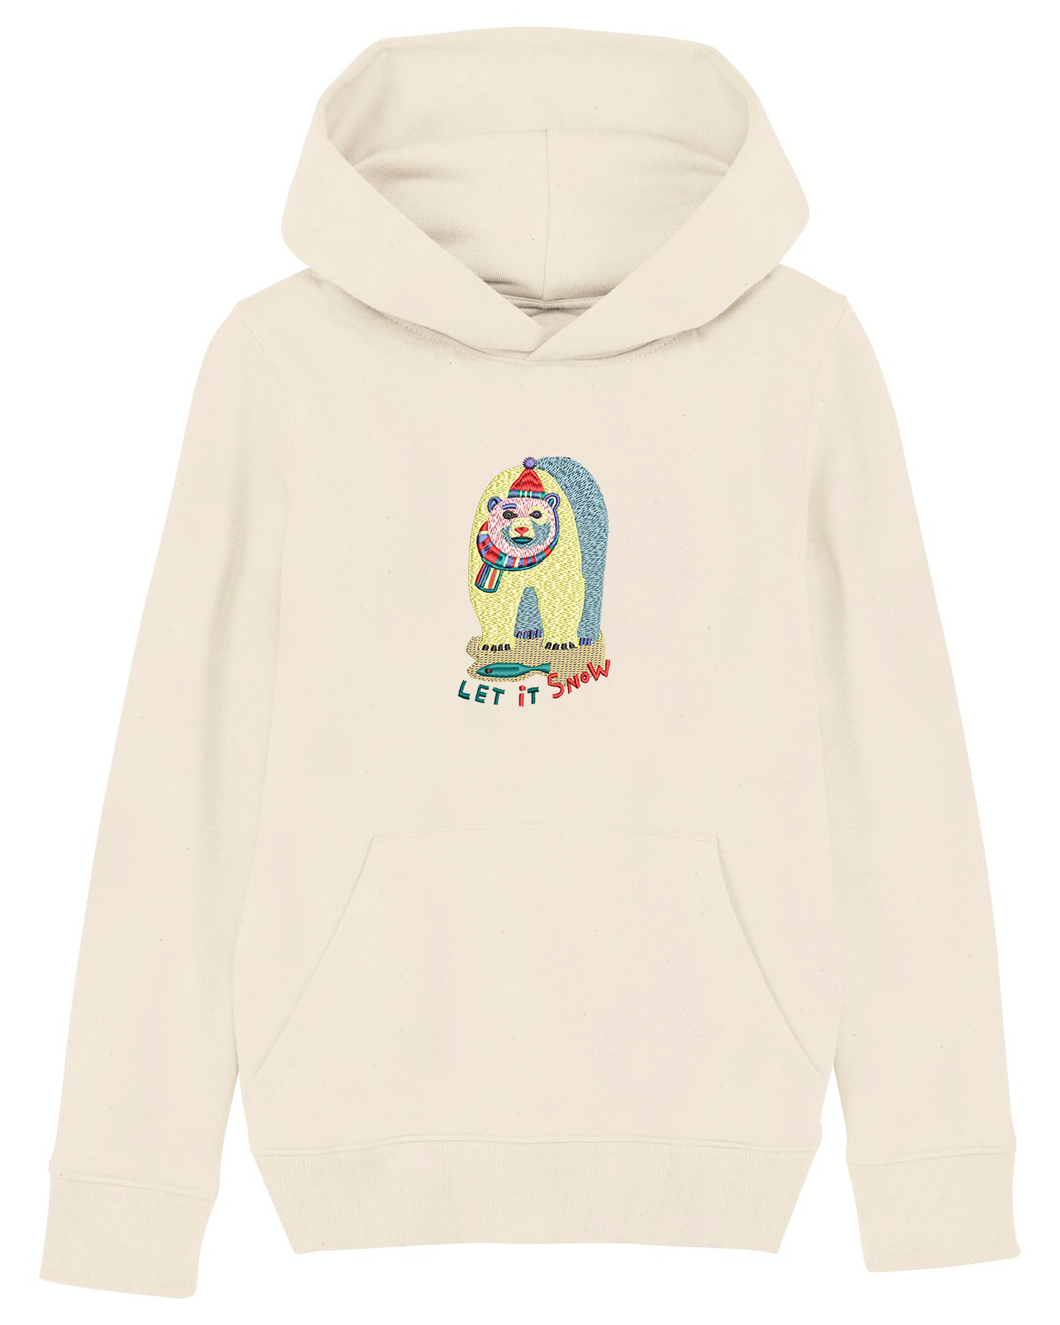 Let it SNOW 🐻‍❄️- Embroidered UNISEX KIDS hoodie